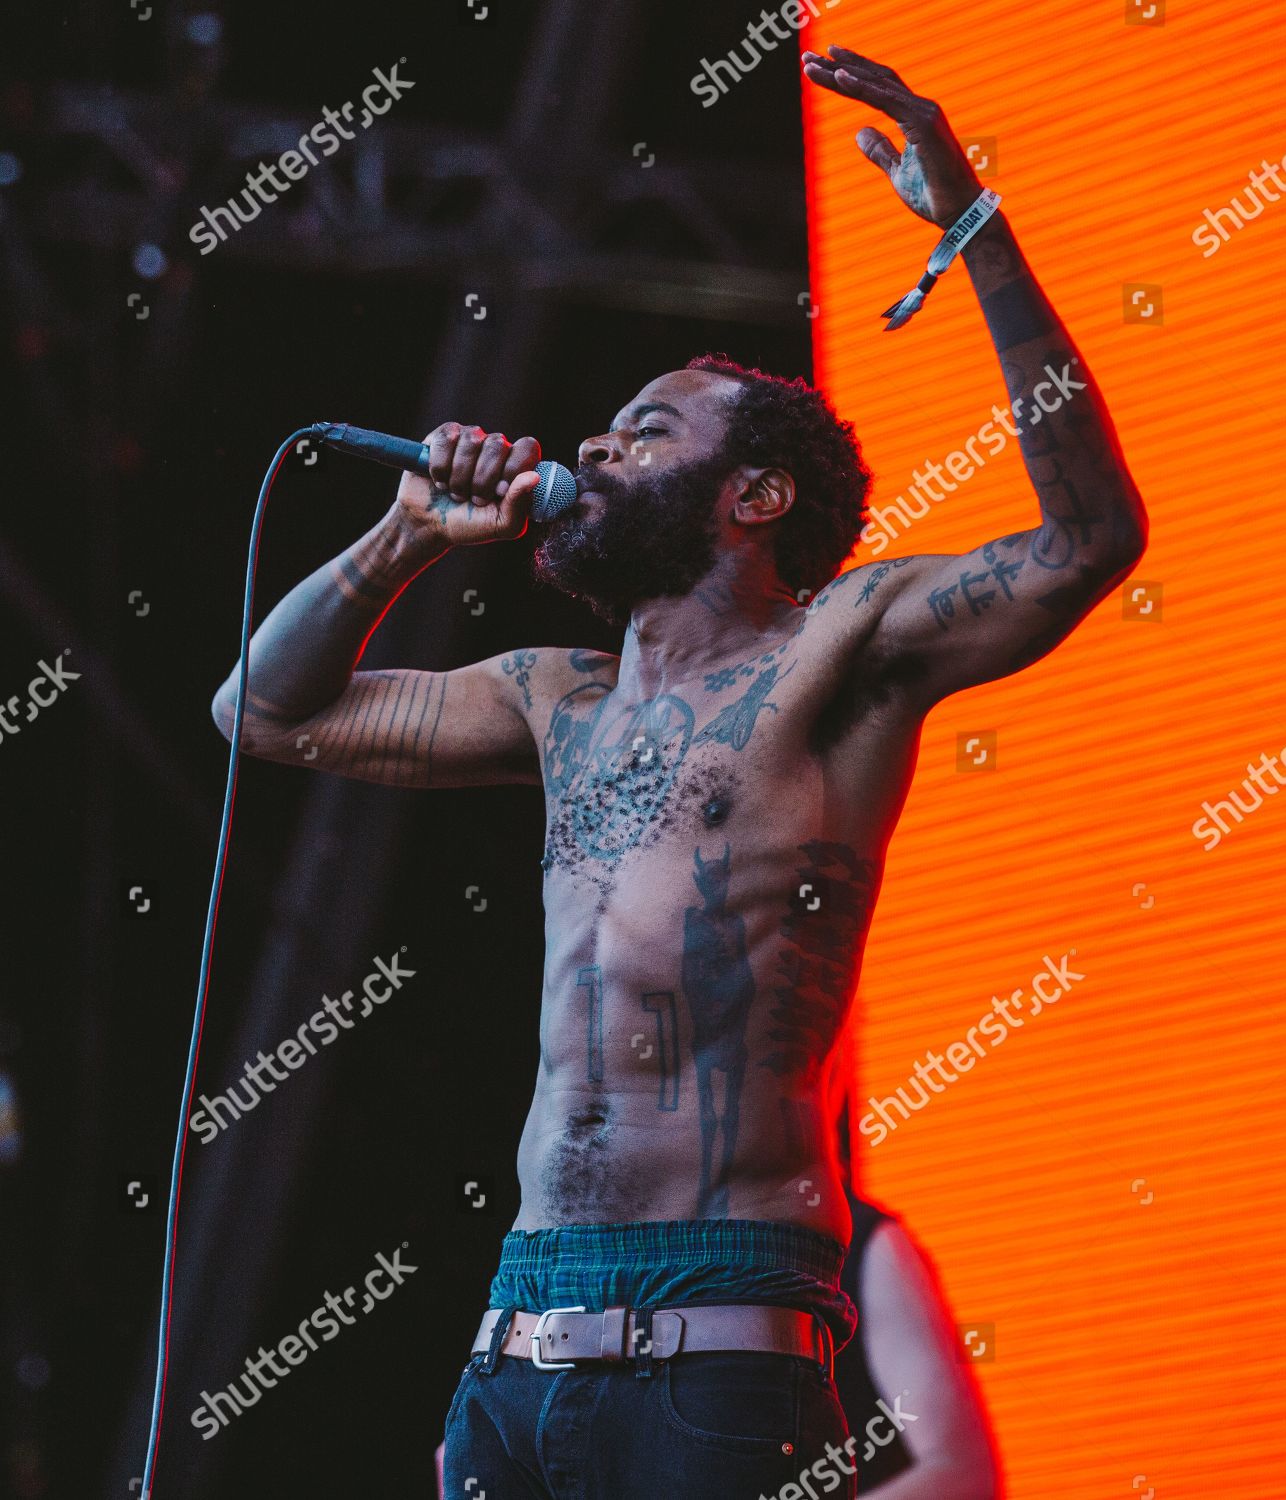 Death Grips hint at return and tease new music